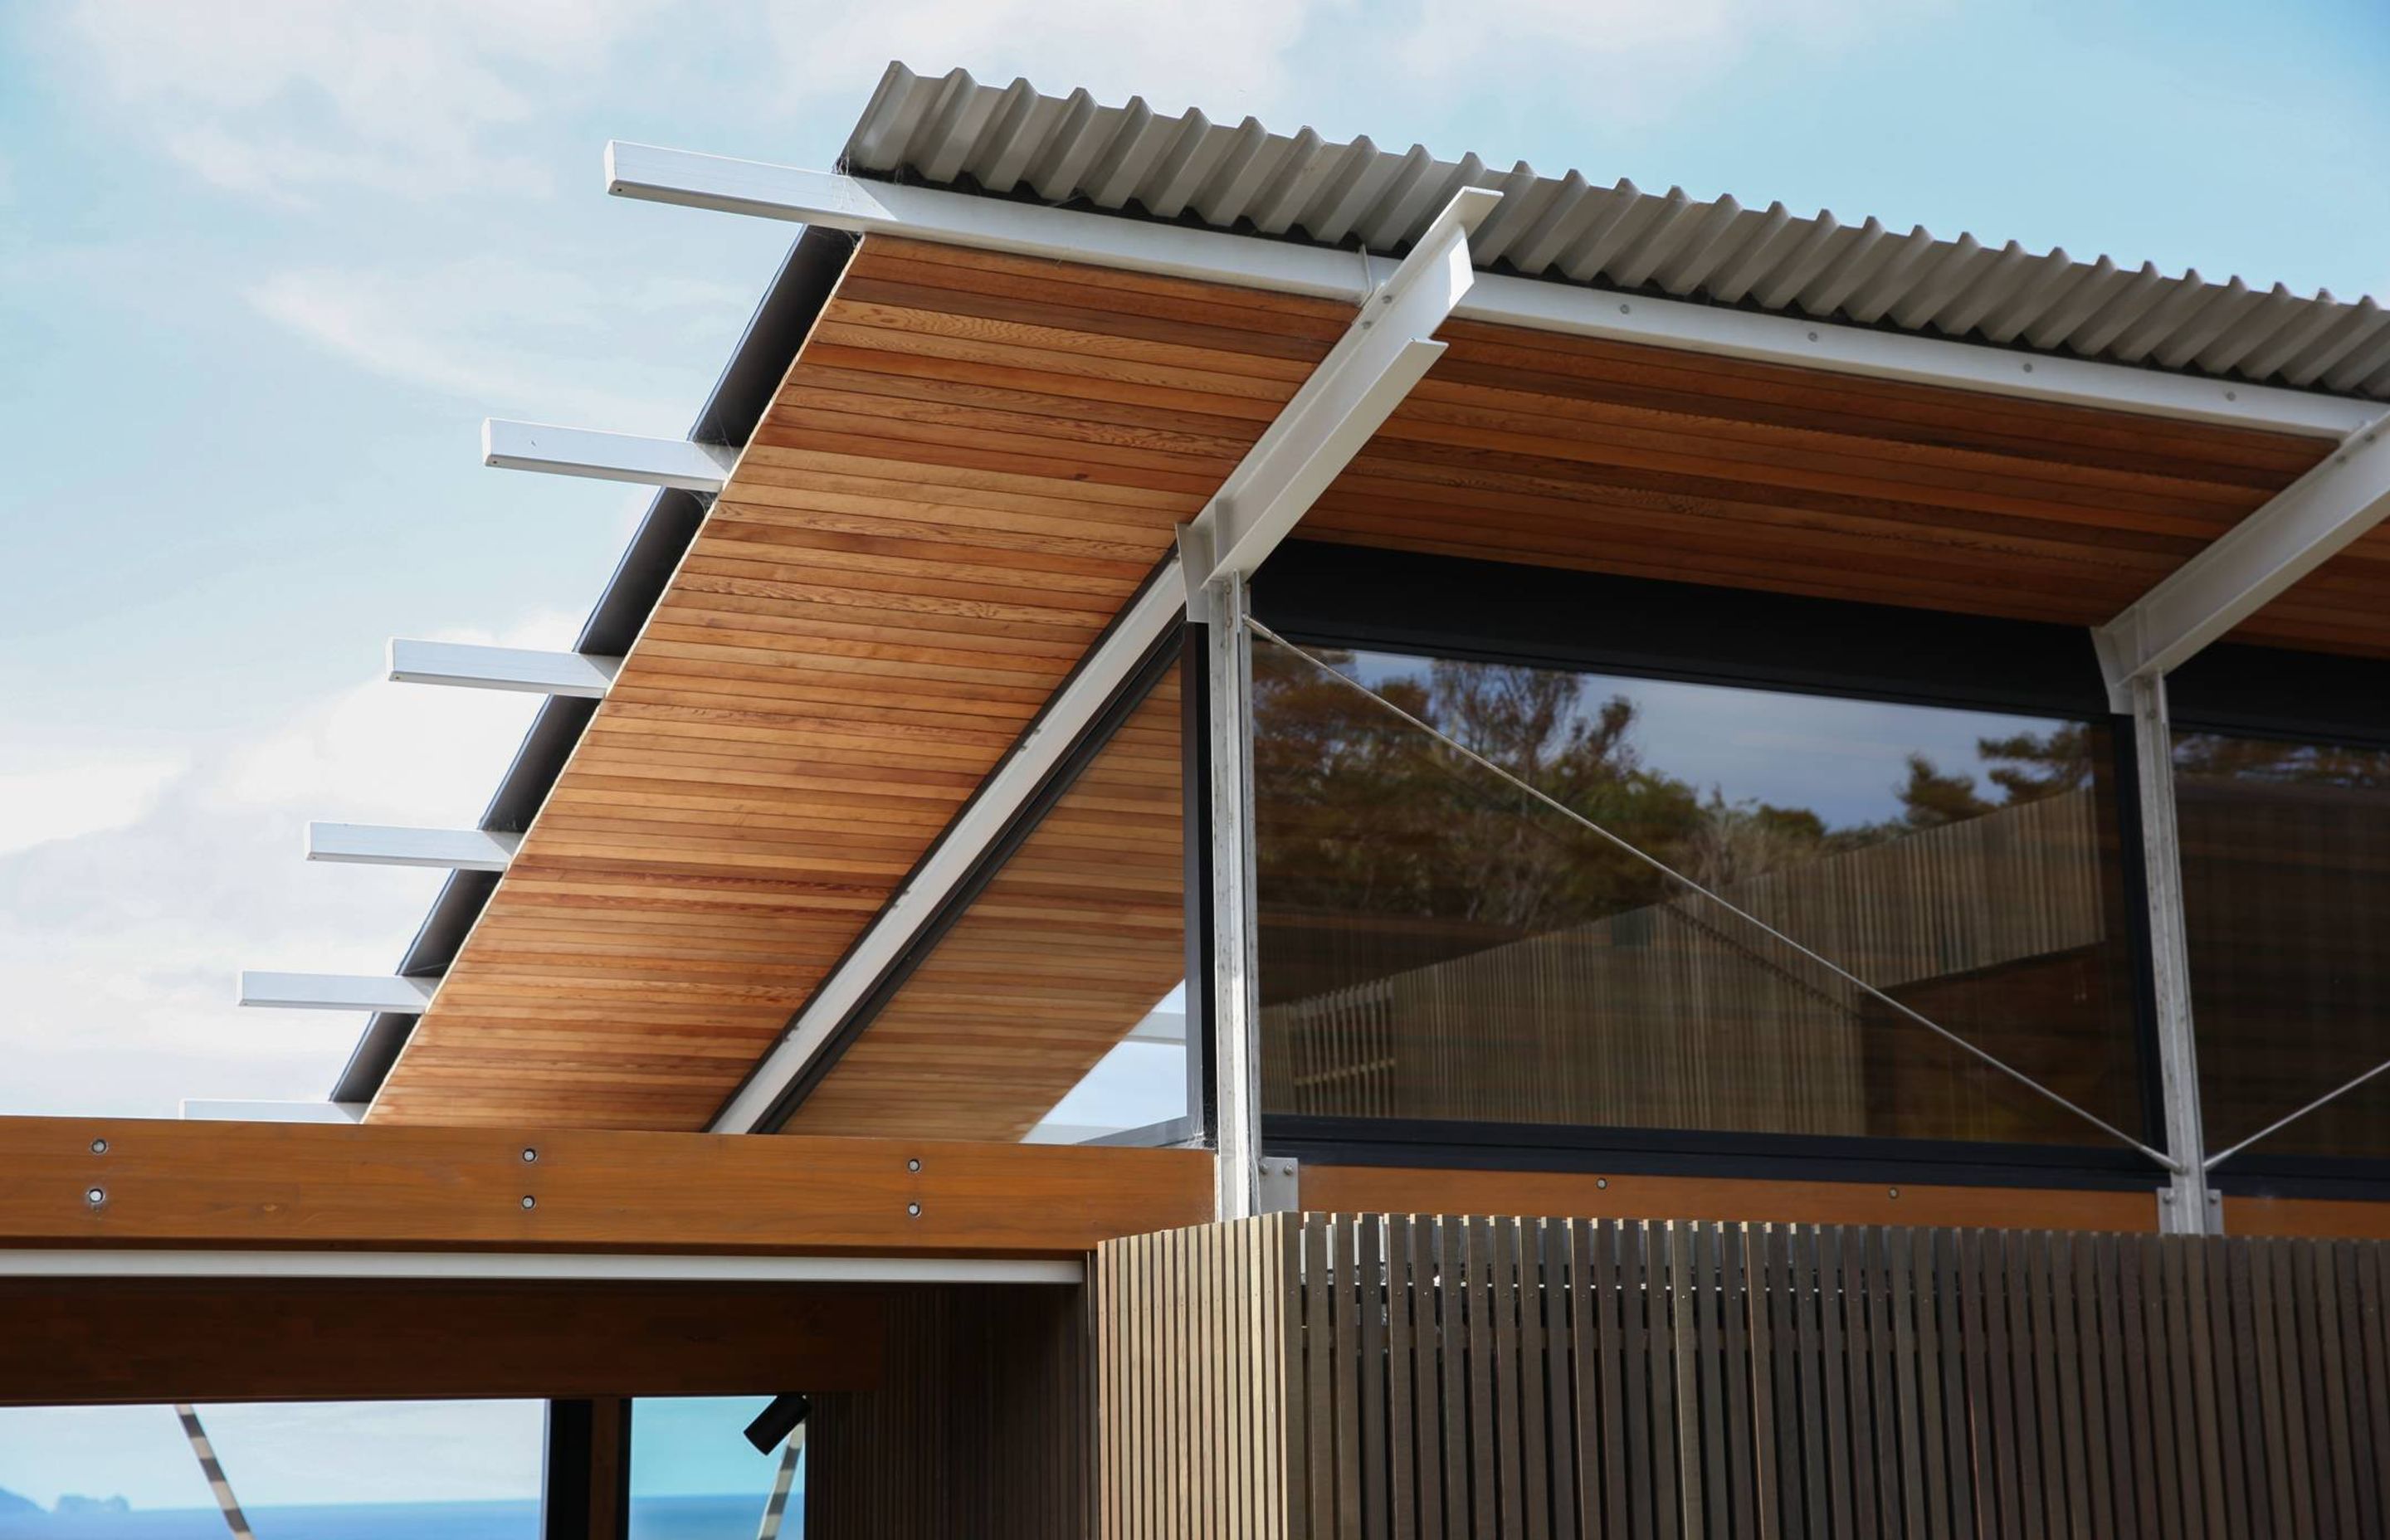 A detail showing the cedar-clad soffit and the steel structure with cable ties providing additional bracing. 